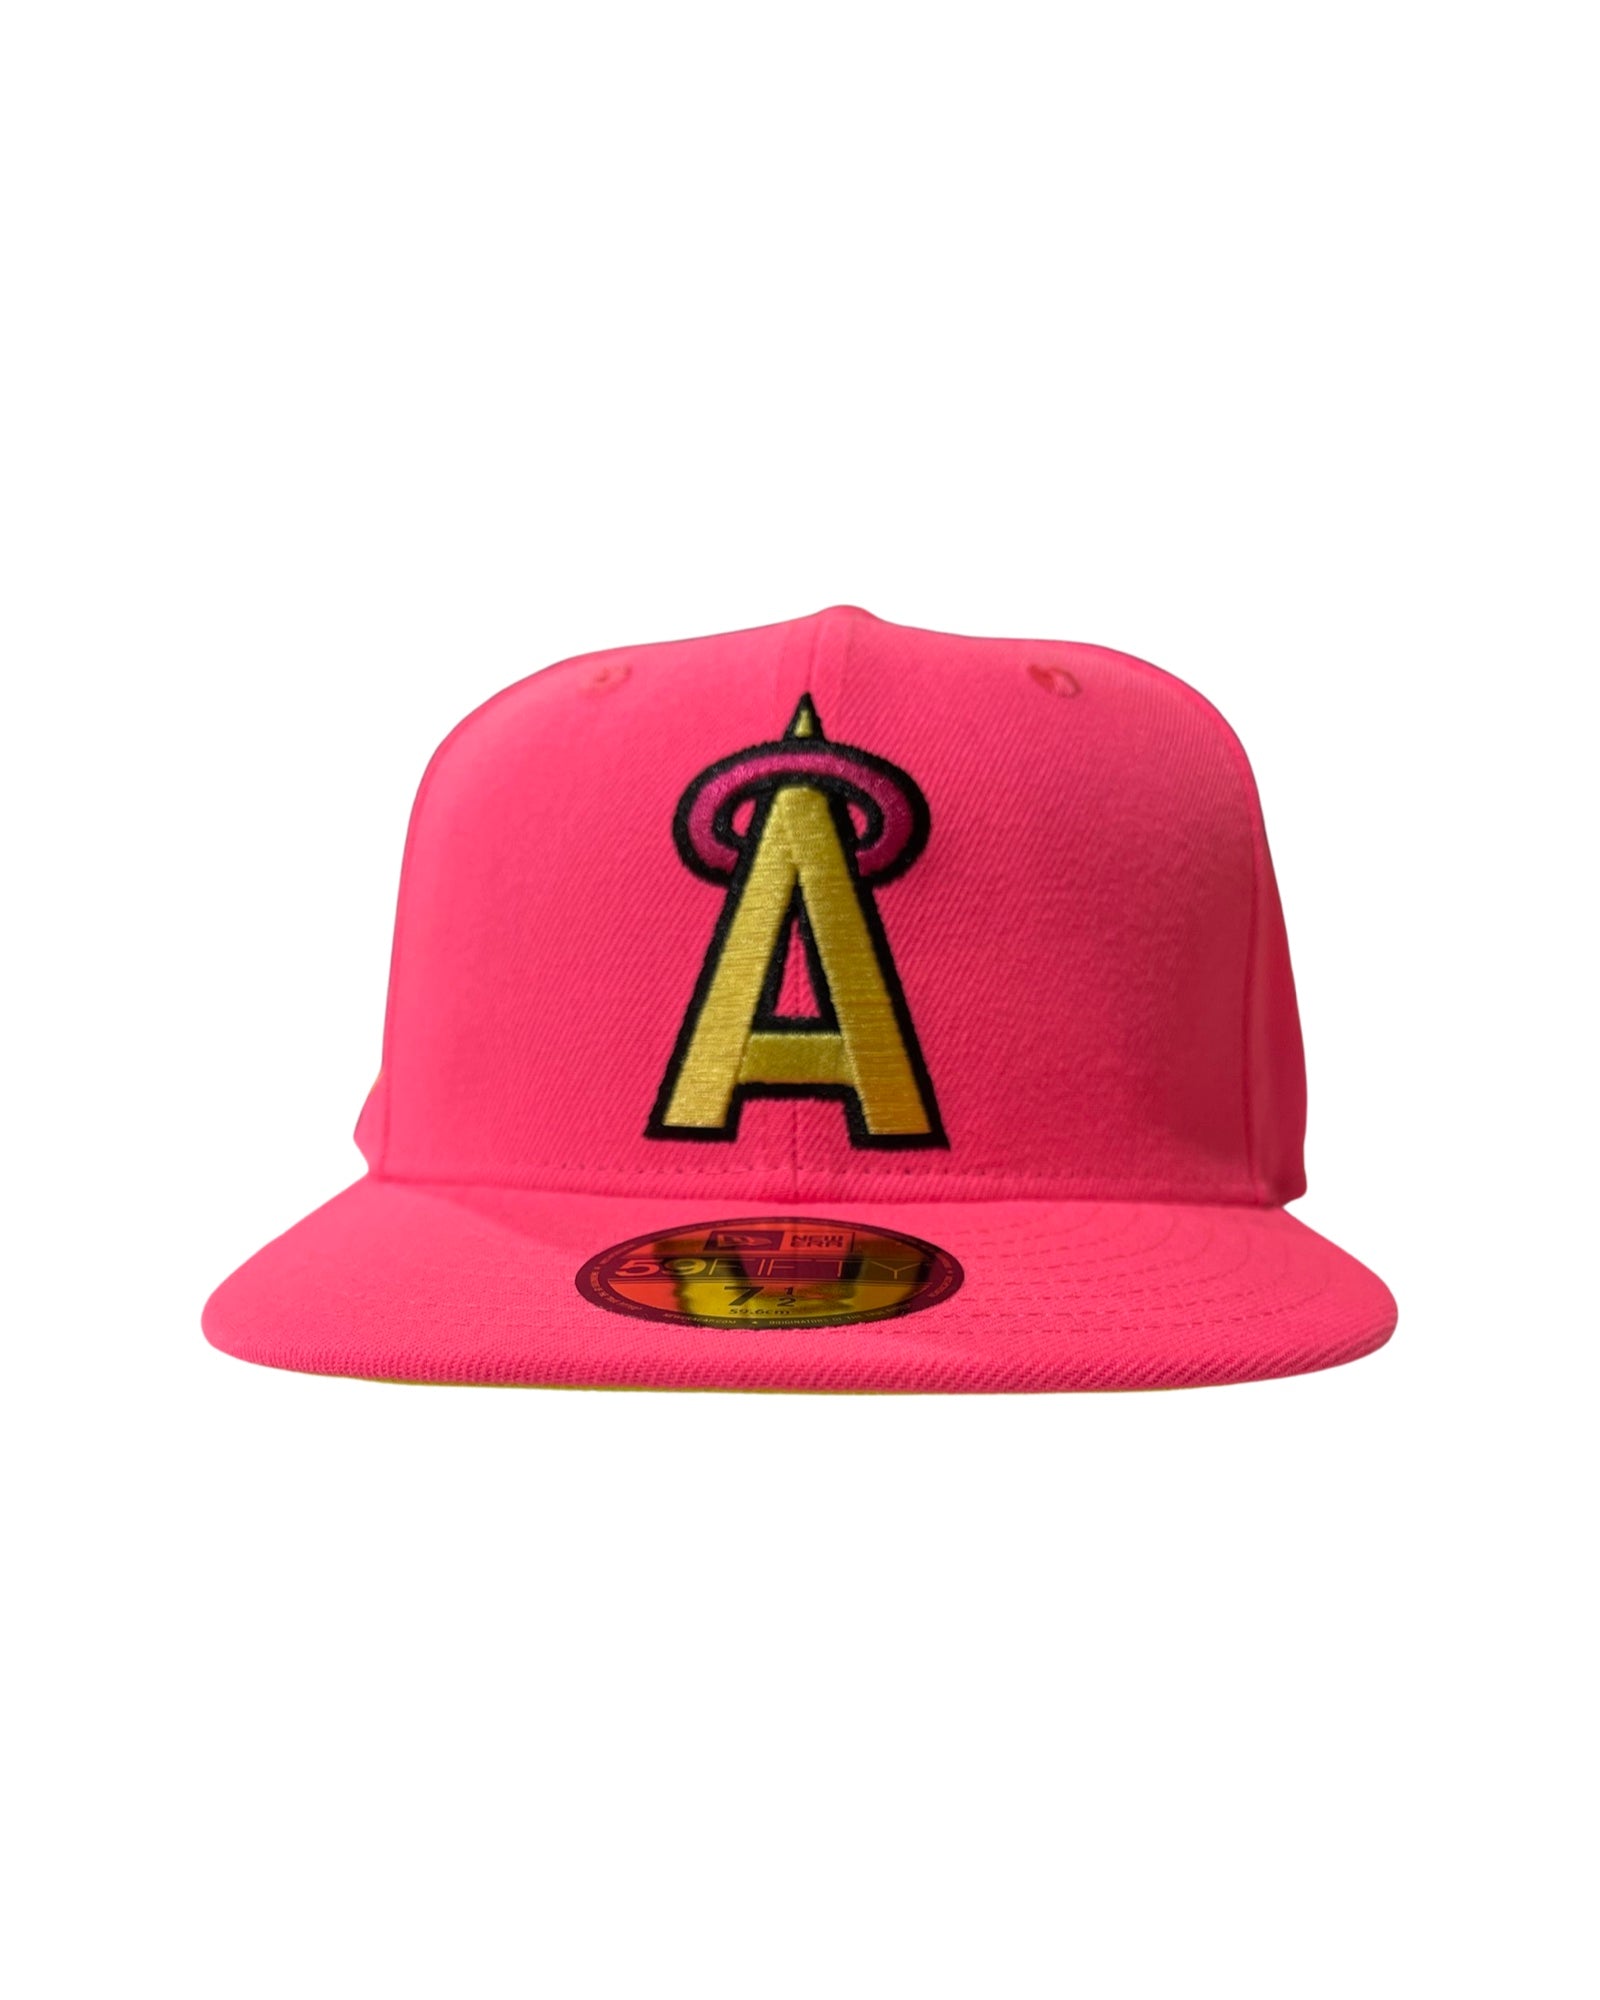 New Era 59Fifty Boston Red Sox Fitted Hat Size 8 Pink Rare 